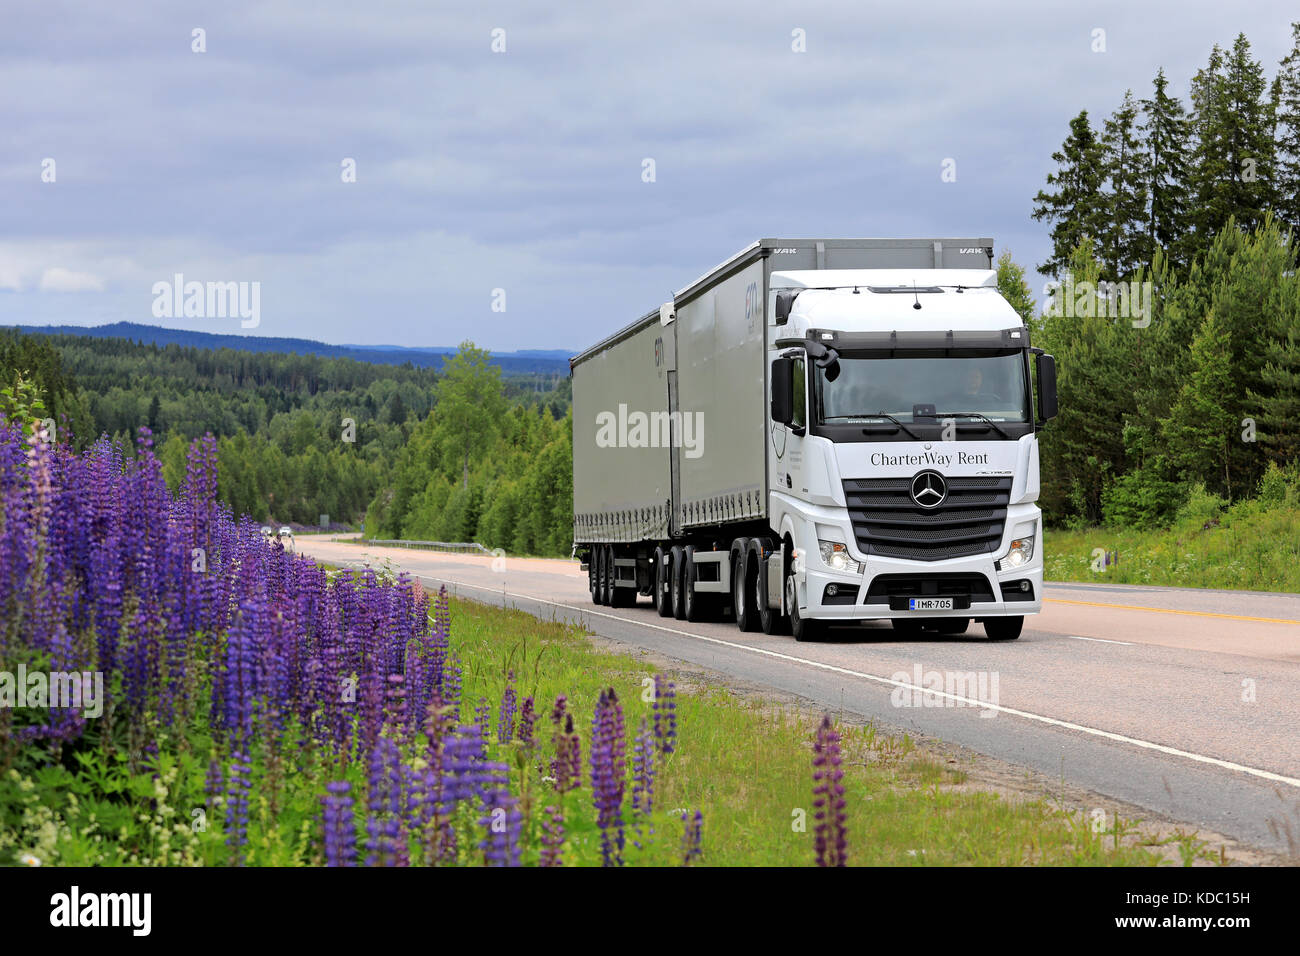 JAMSA, FINLAND - JULY 6, 2017: White Mercedes-Benz Actros 2551 cargo truck transports goods along scenic highway in Central Finland at summer. Stock Photo